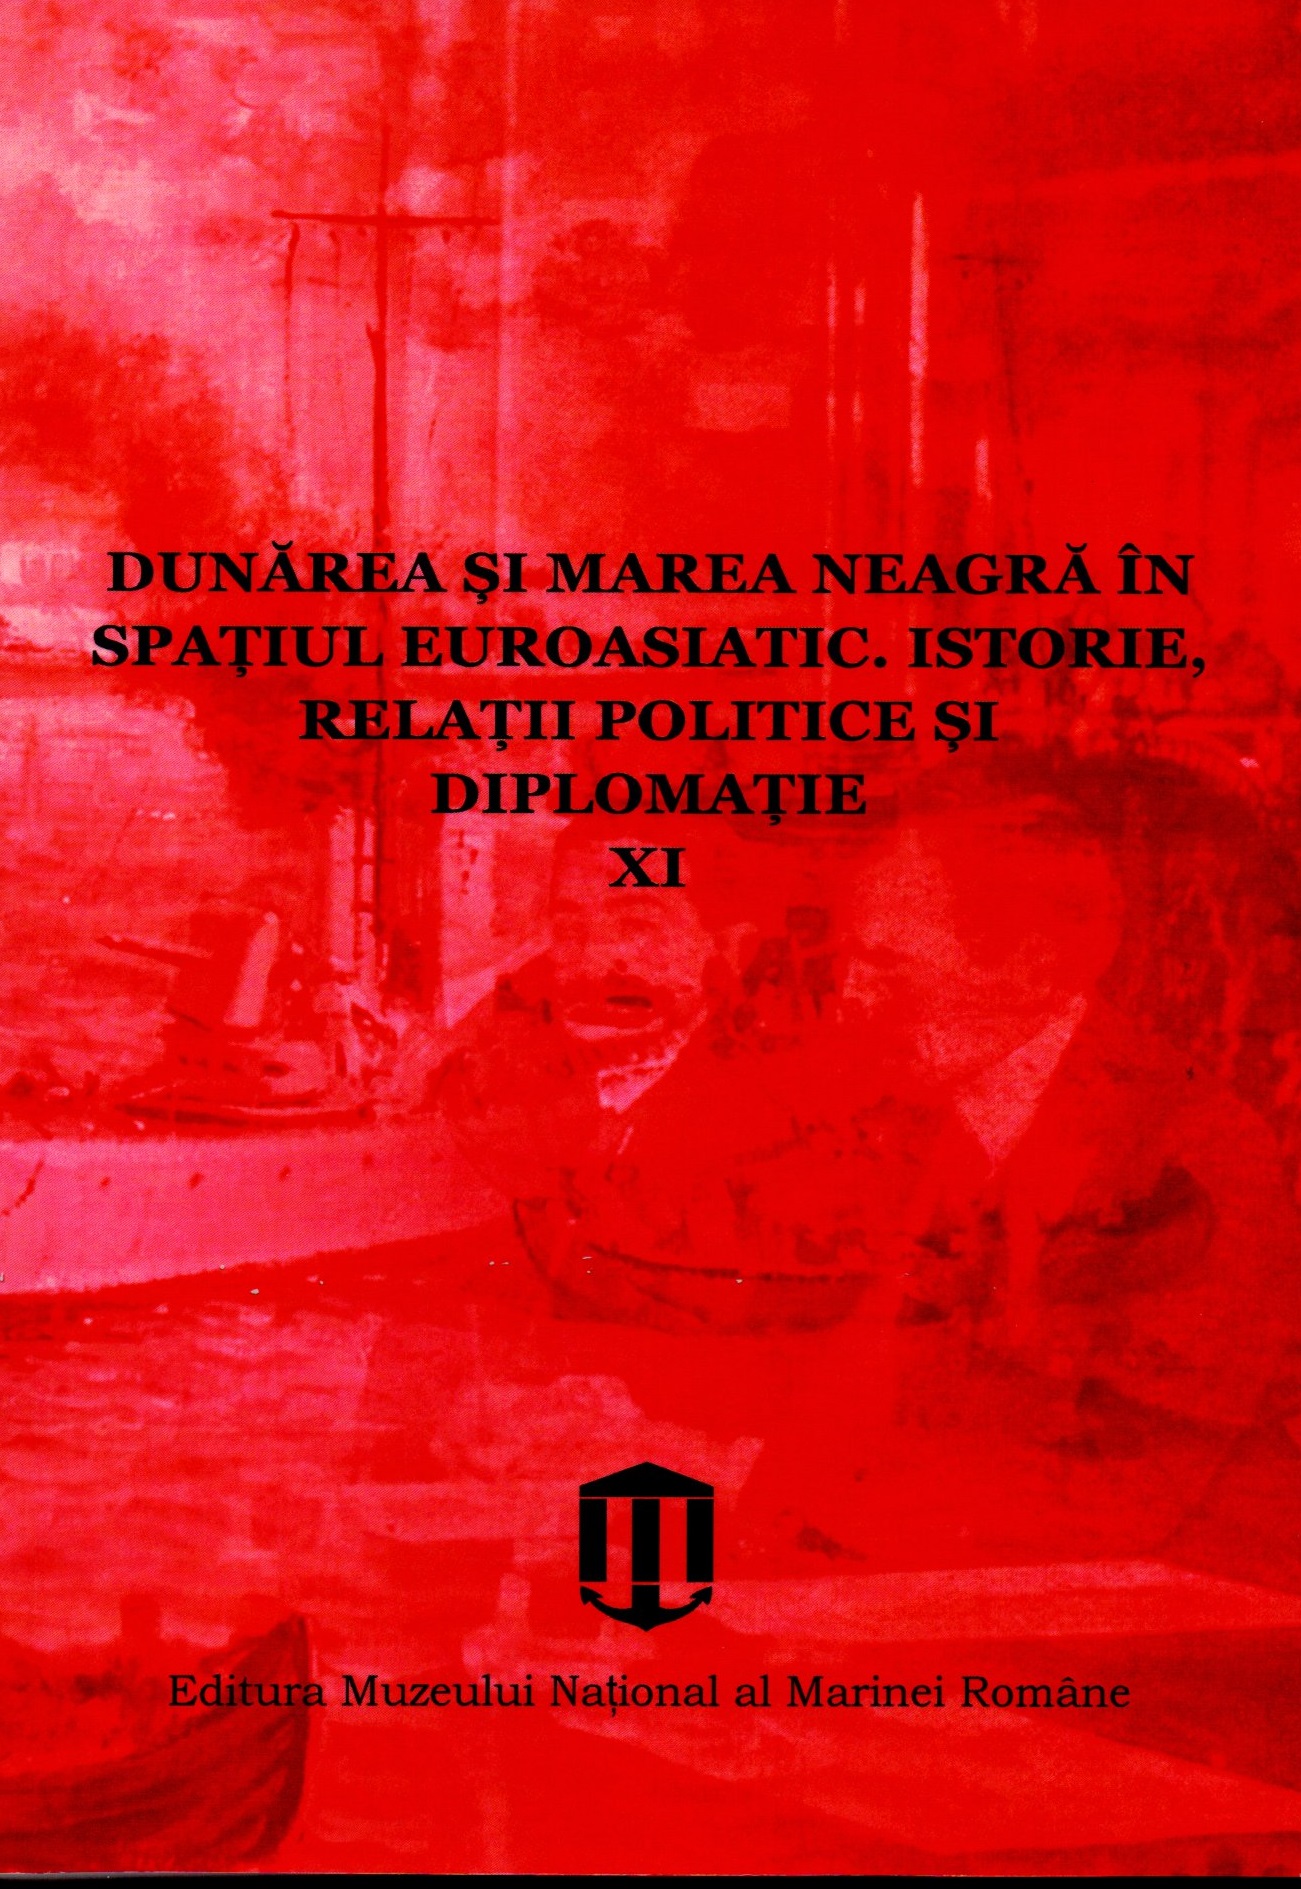 THE „ÎMPĂRATUL TRAIAN" PASSENGER AND THE GRECO-ROMANIAN DIFFERENCE GENERATED BY THE 
AGGRESSION IN THE PORT OF PIRAEUS Cover Image